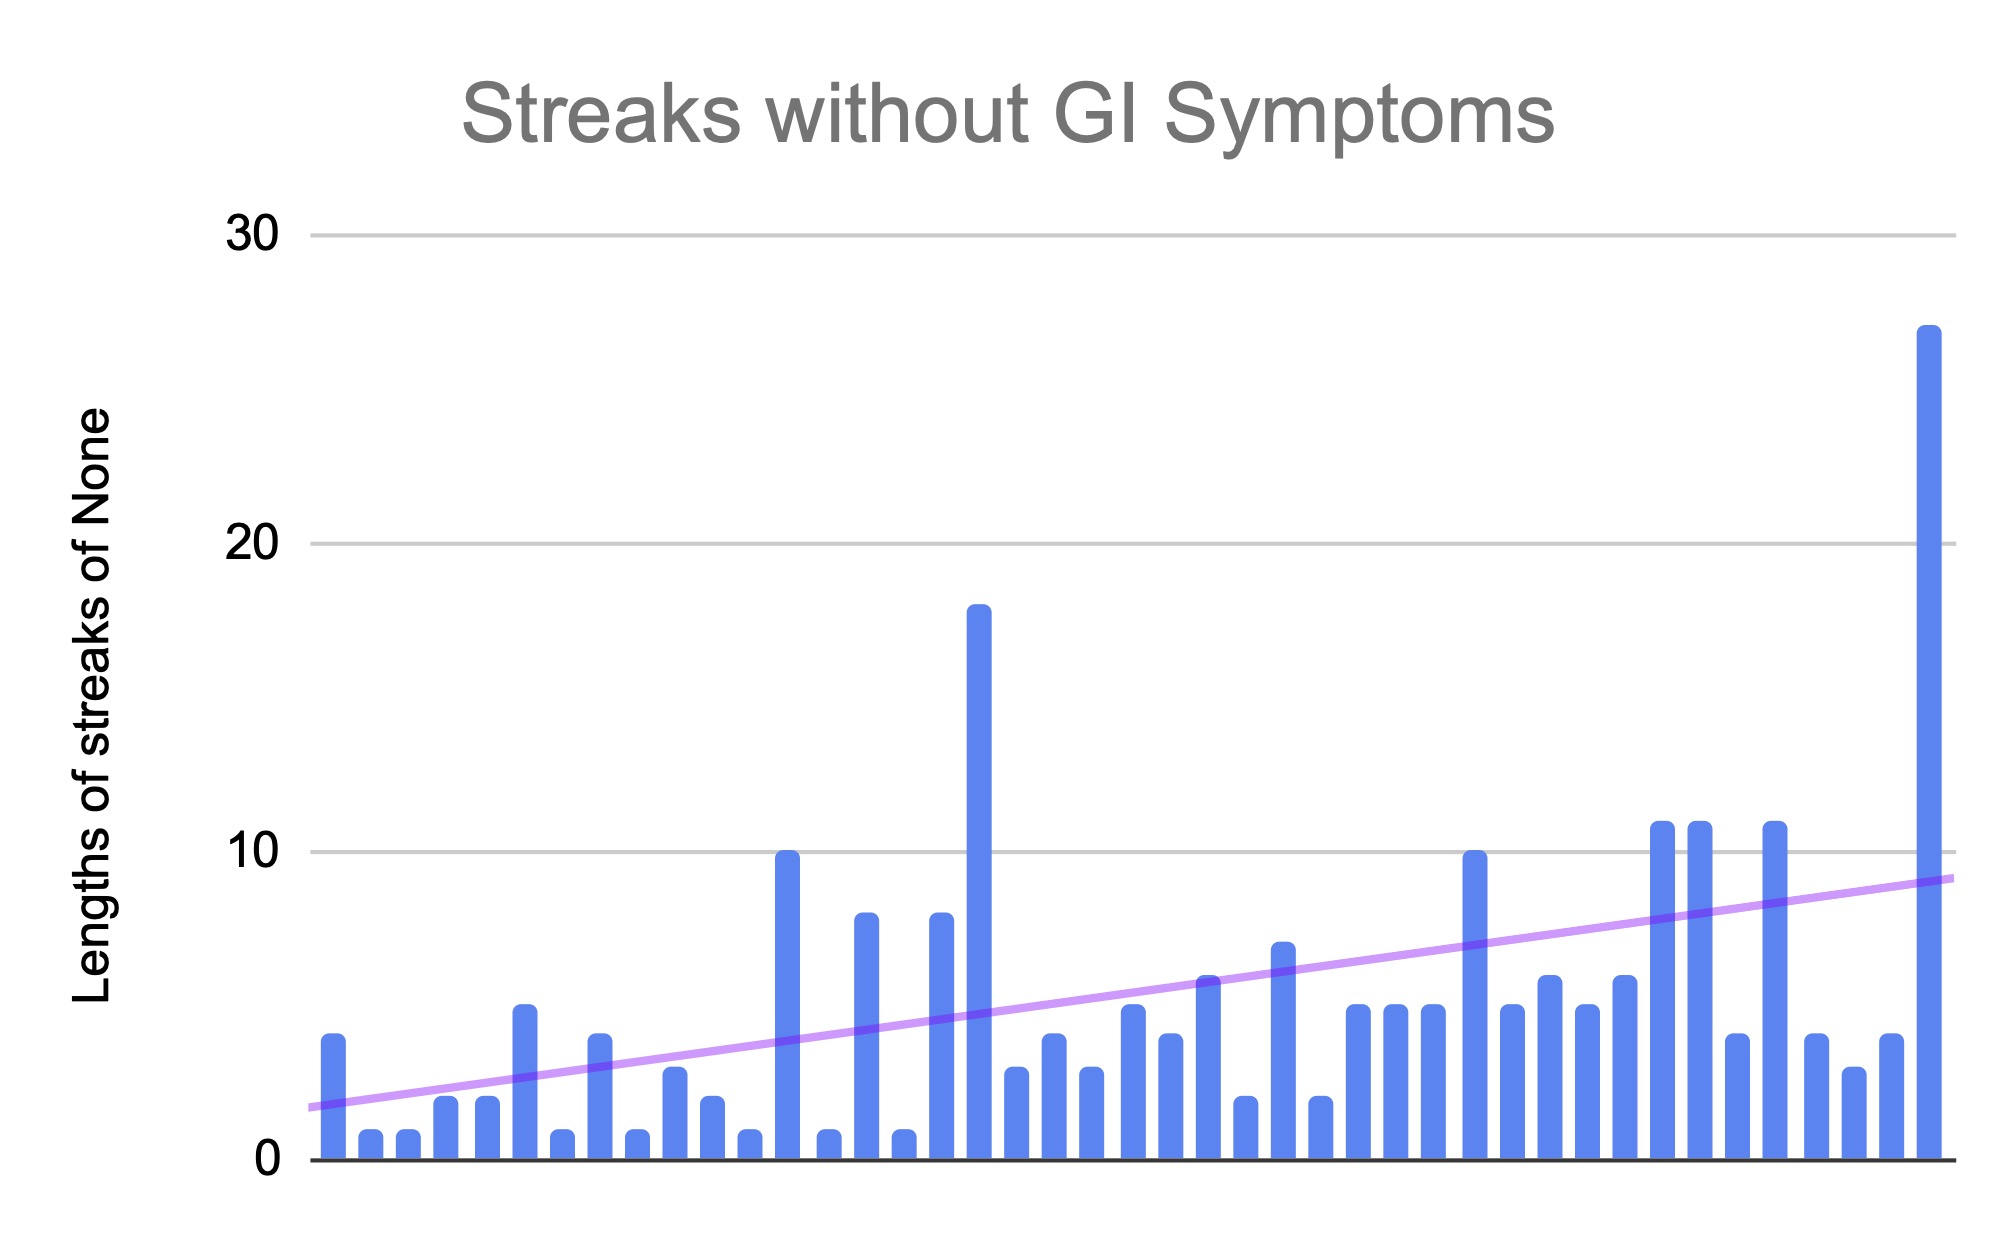 Showing the increasing length of streaks of consecutive days where I did not have any GI symptoms. The trend line shows a steady increase in the length of these streaks throughout the year. 